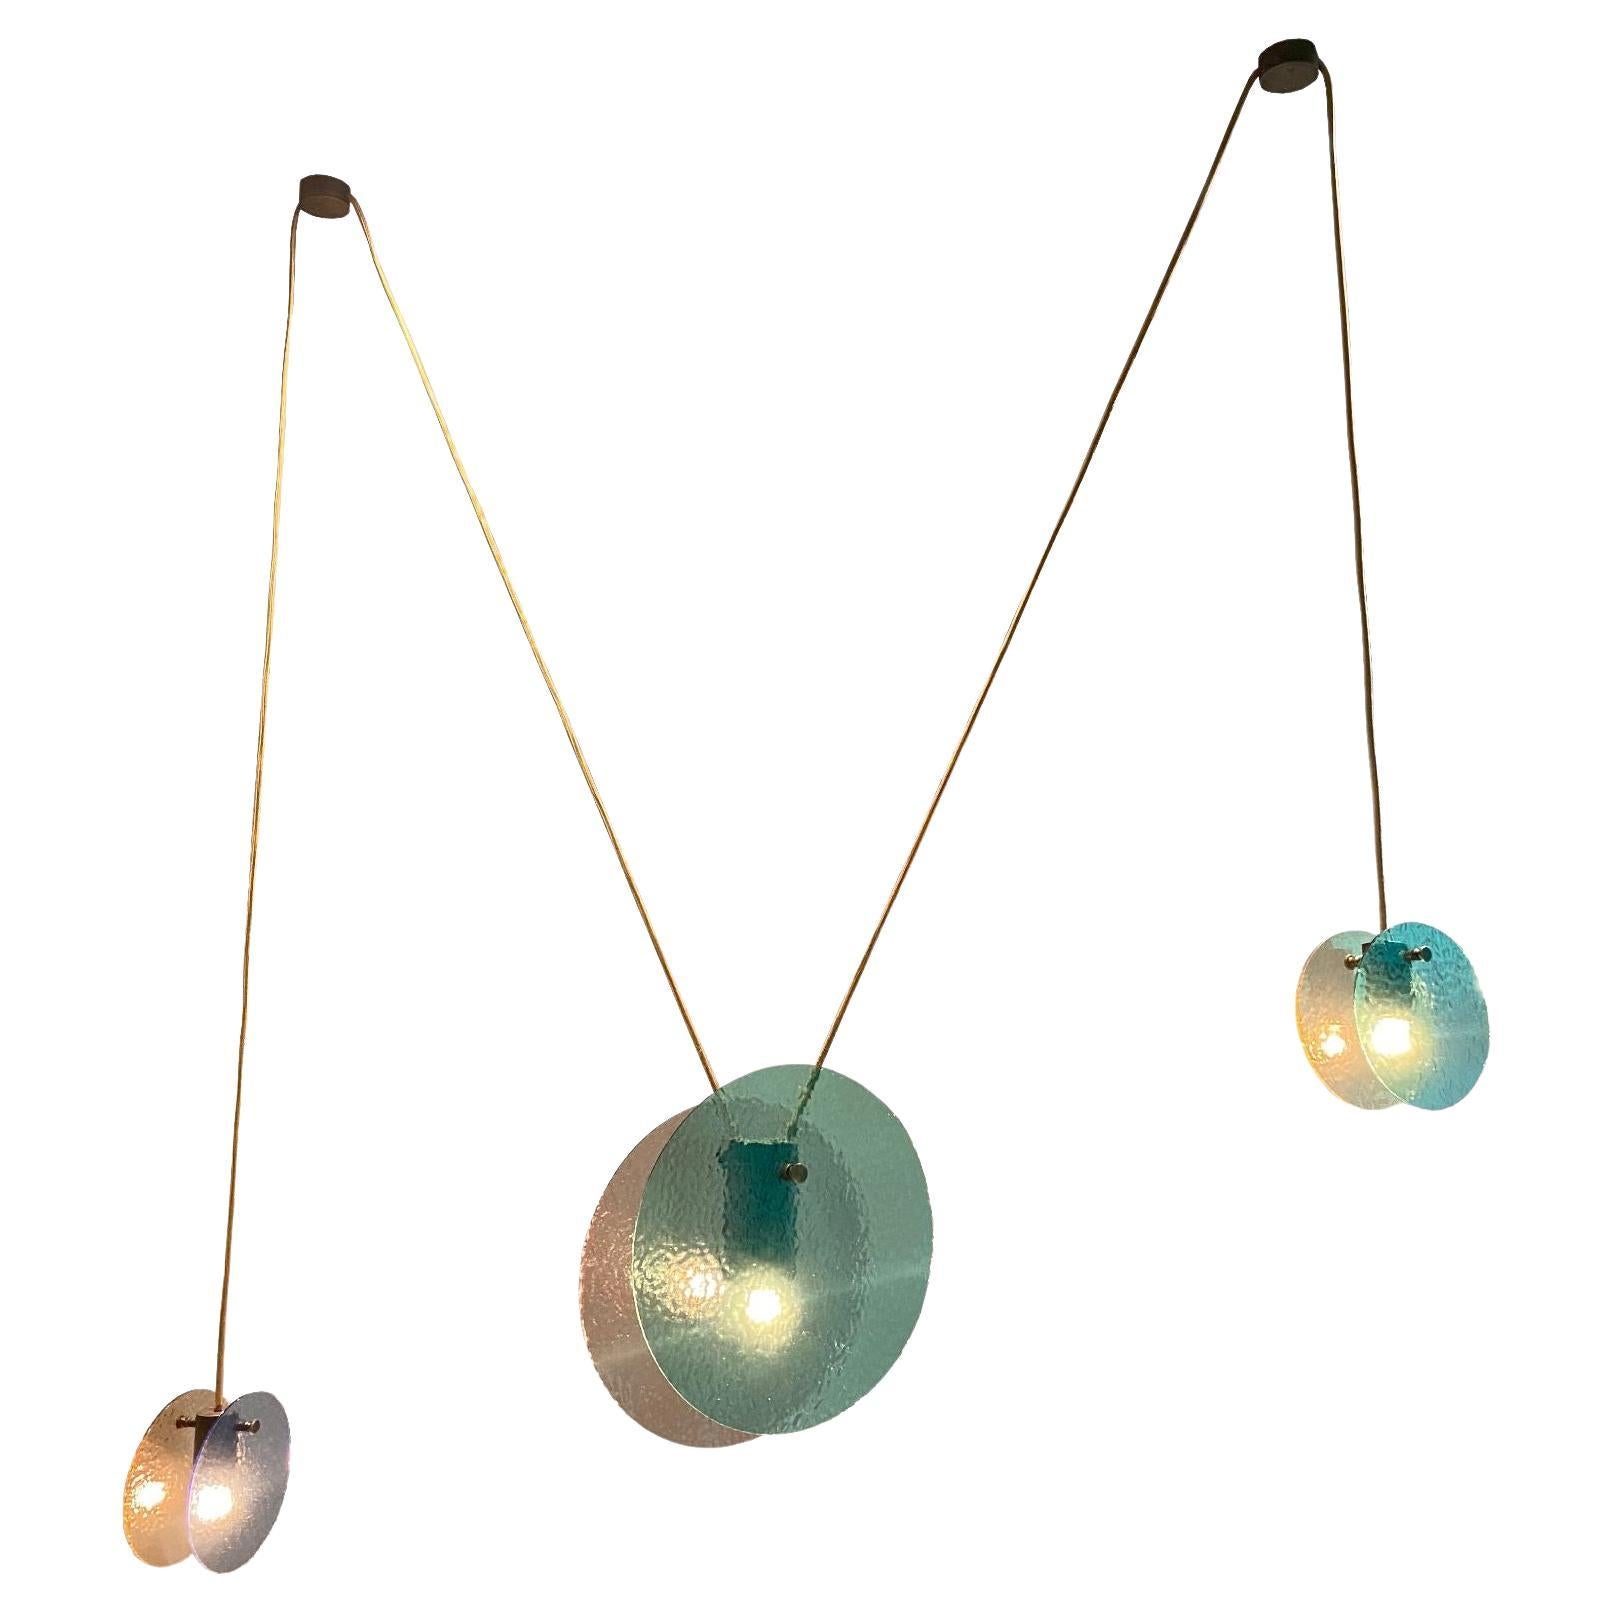 Kalupso Small Ceiling Light by Moure Studio For Sale